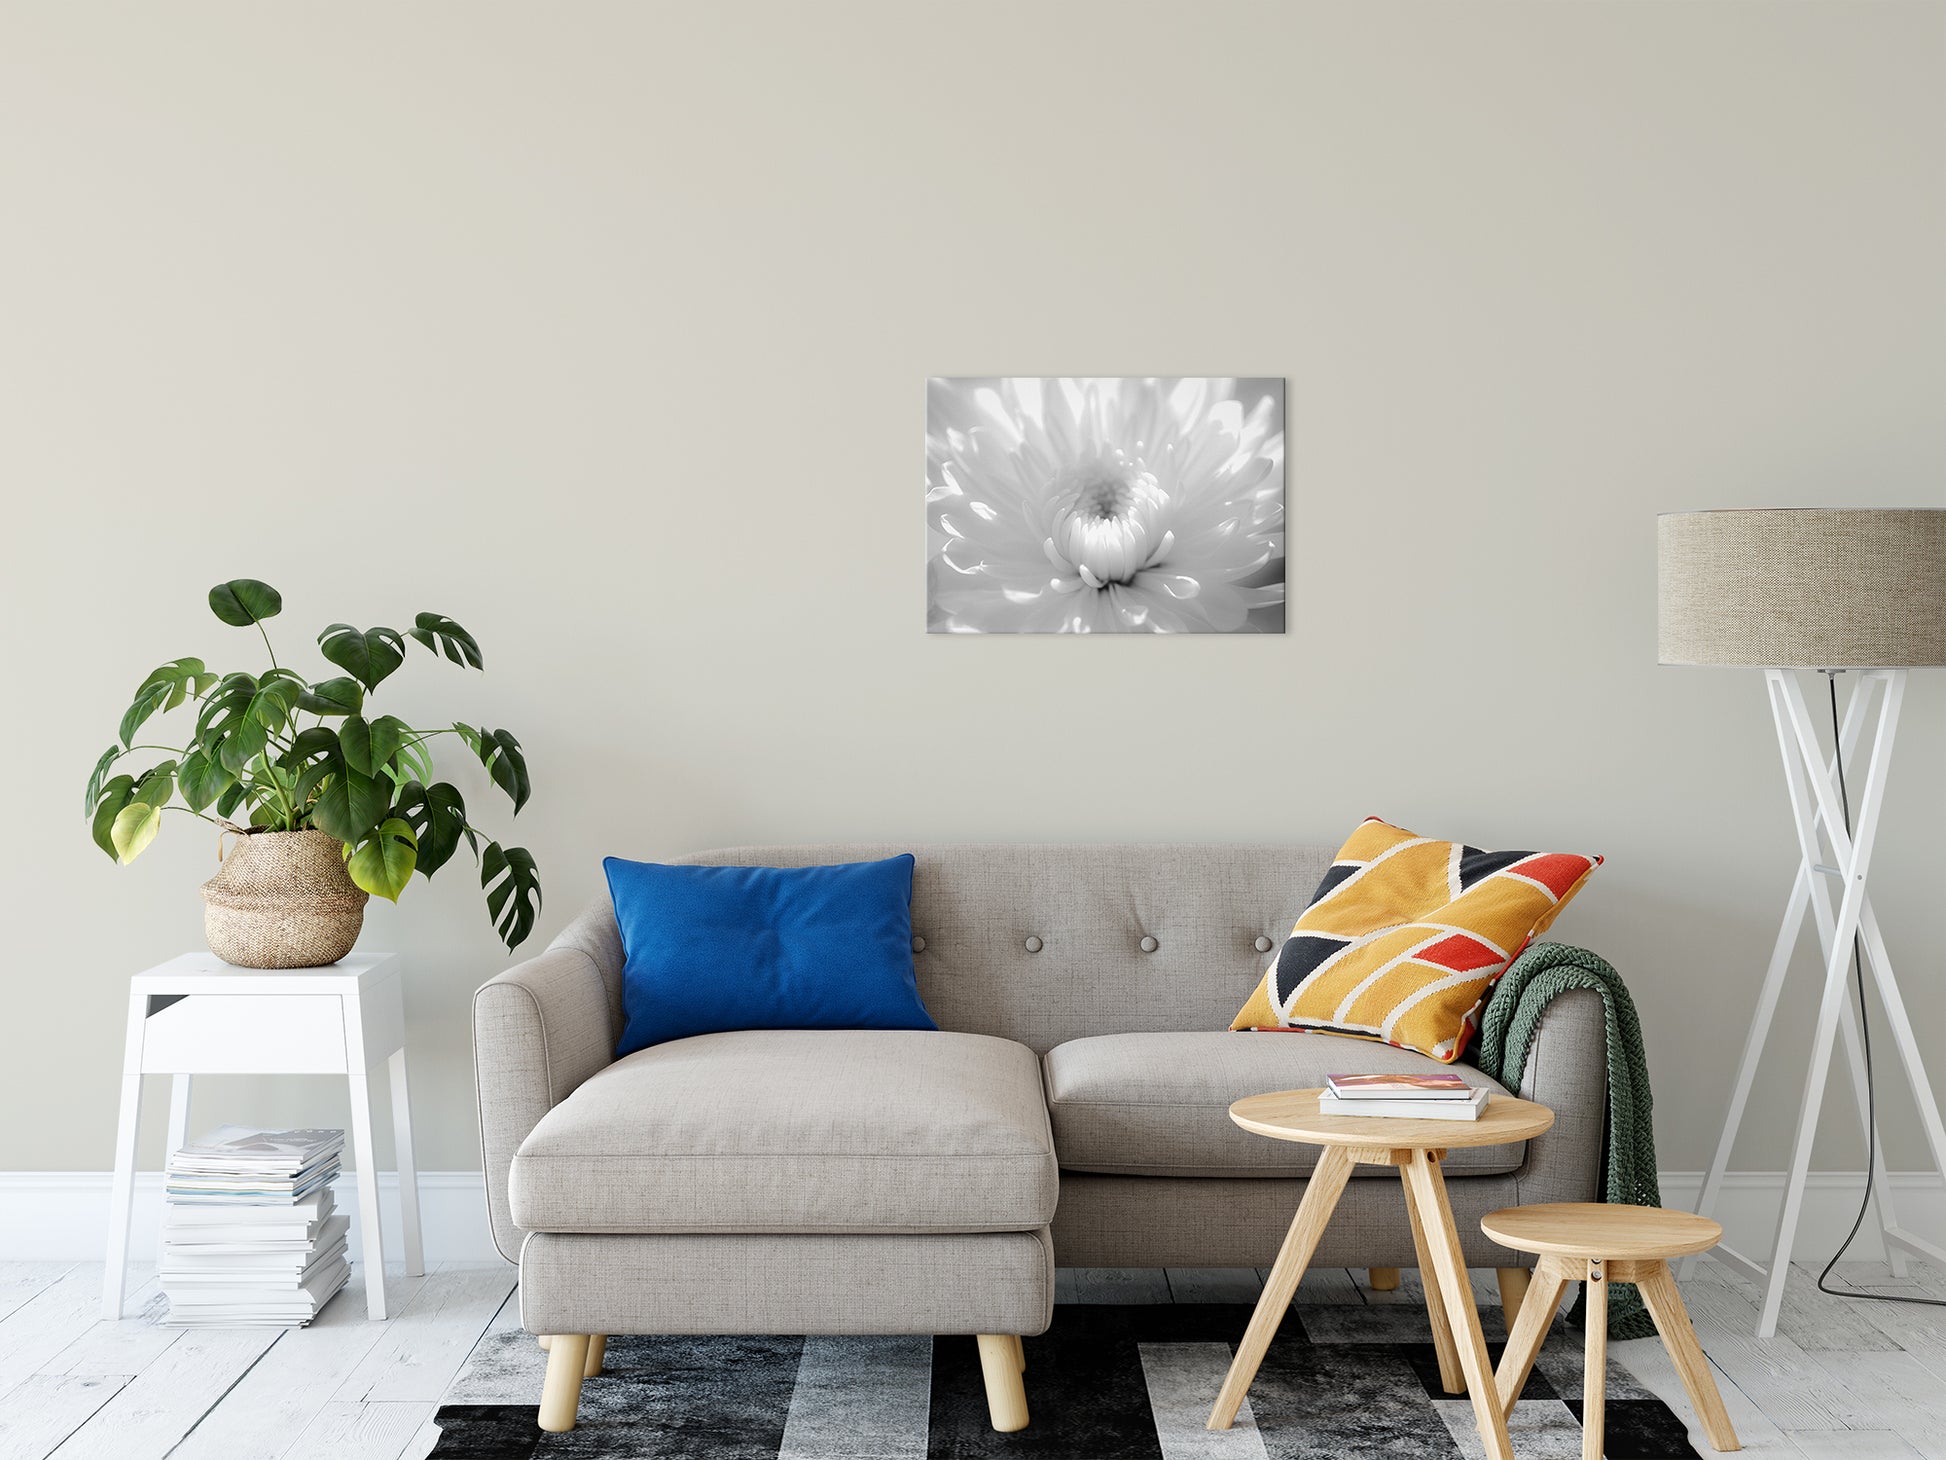 Infrared Flower 2 Nature / Floral Photo Fine Art Canvas Wall Art Prints 20" x 24" - PIPAFINEART